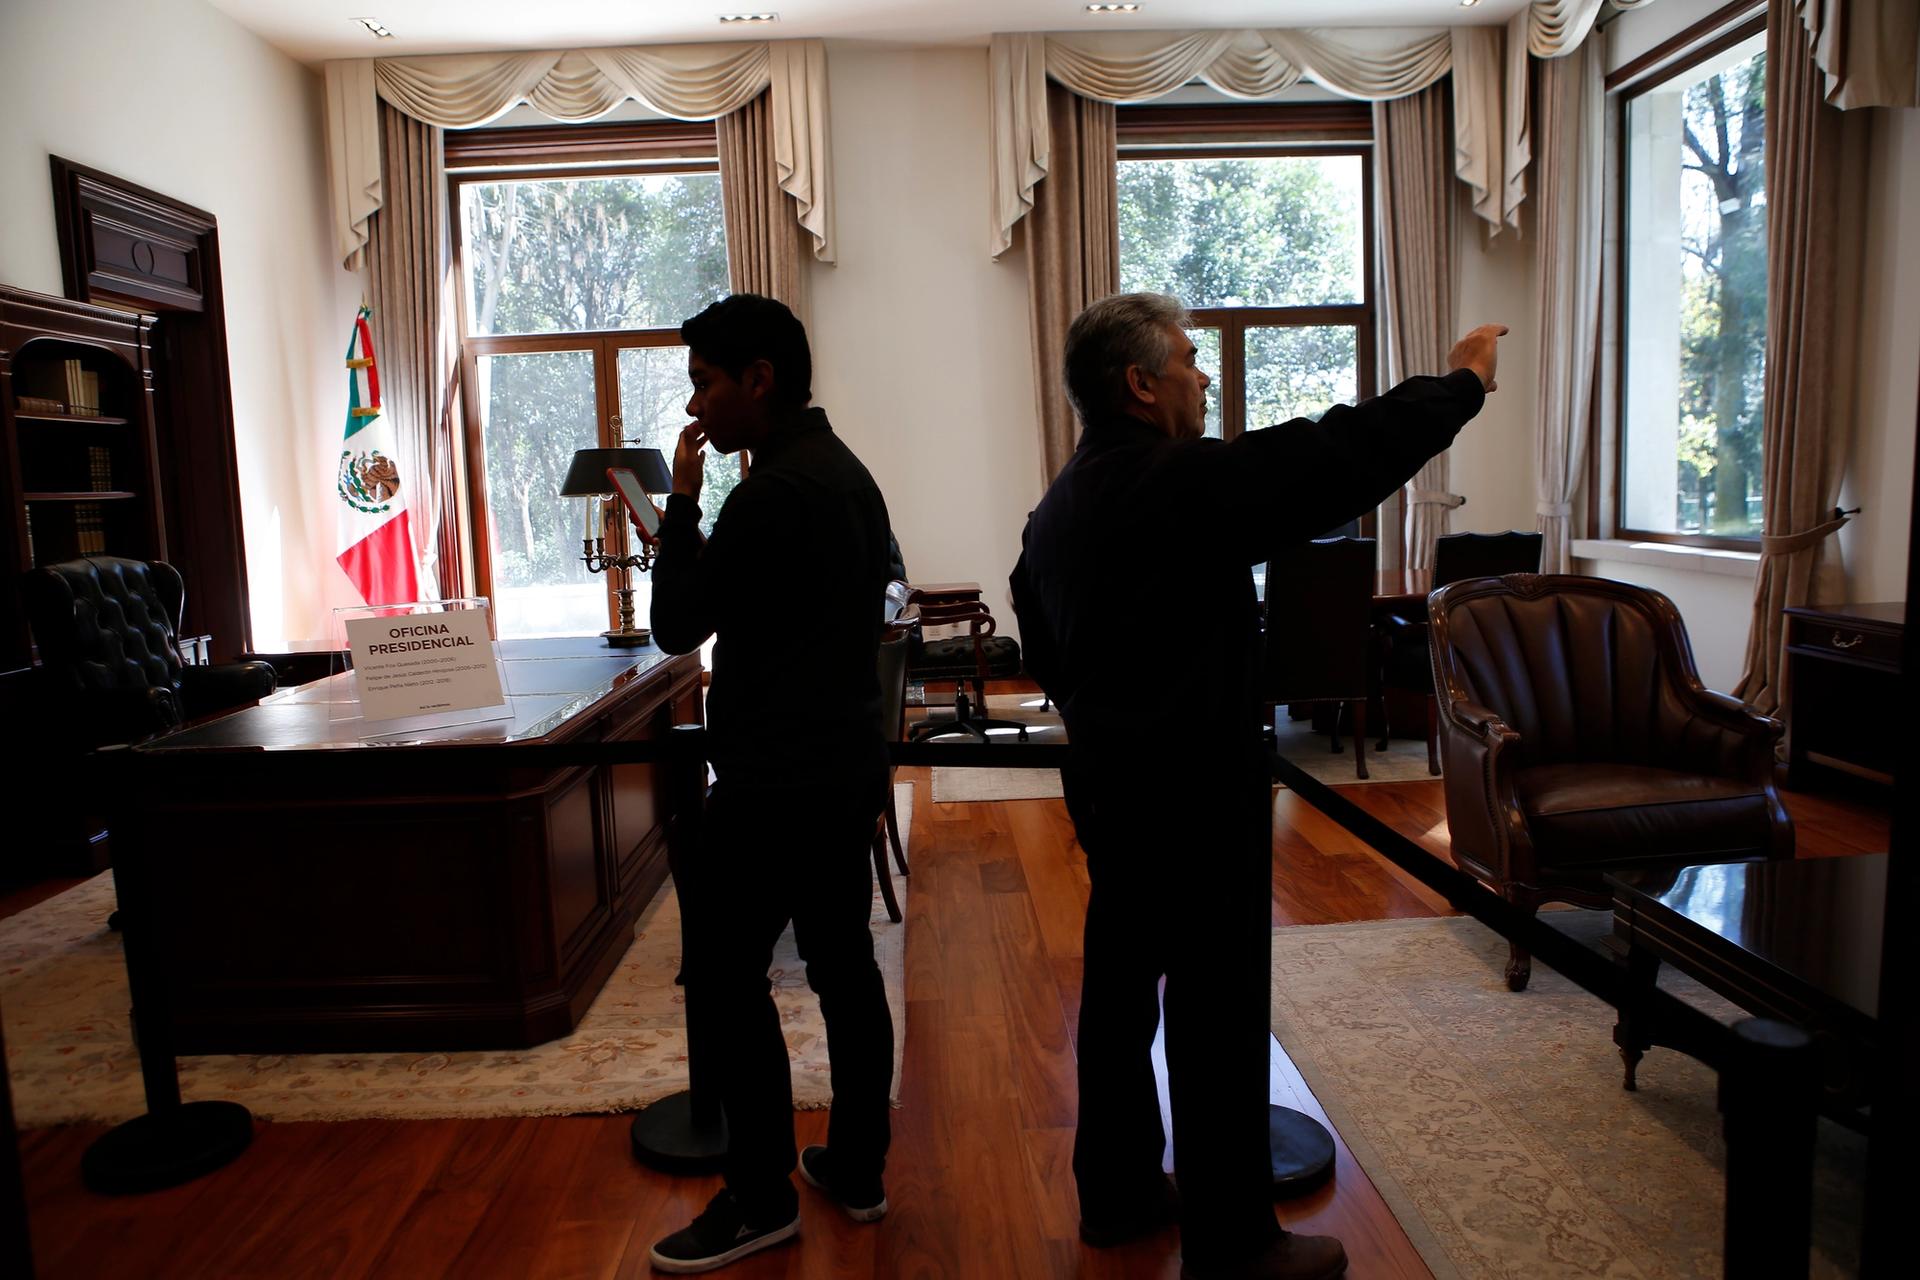 Visitors take photos inside the former presidential office at Los Pinos in Mexico City AP Photo/Ginnette Riquelme